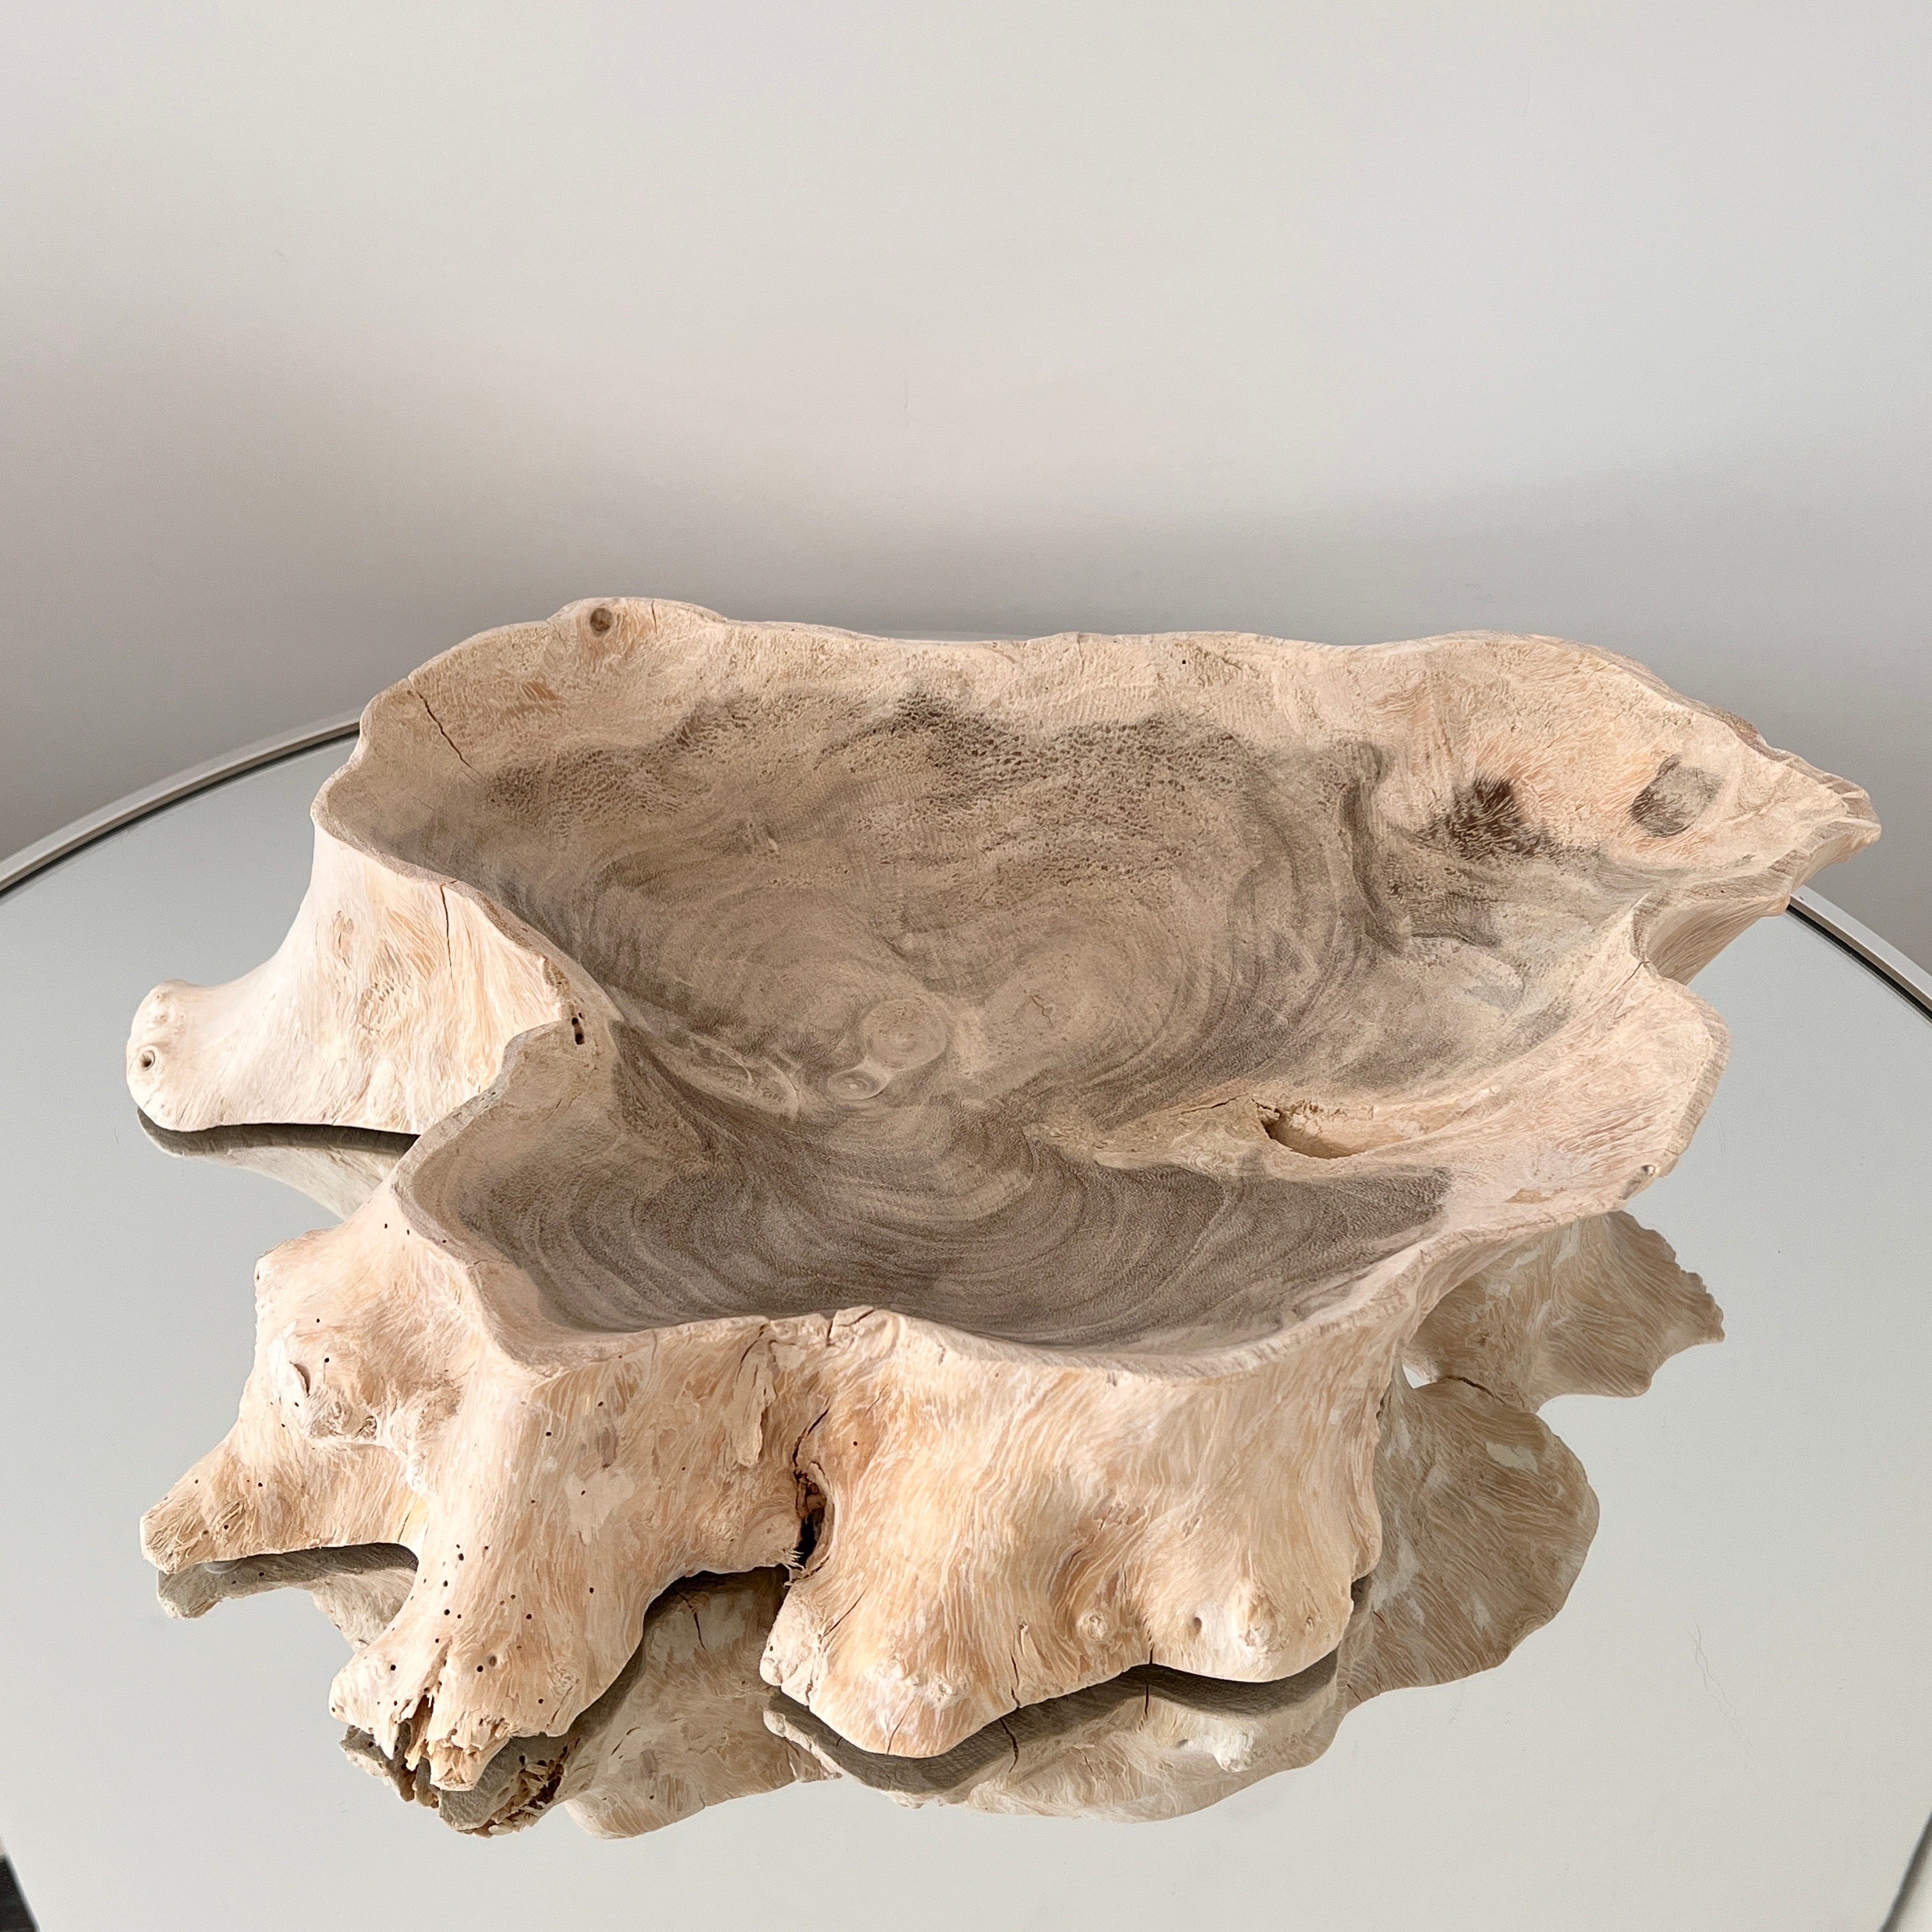 Organic Modern teak wood bowl with live edge. Hand cut by Balinese artisans, the bowls are made from reclaimed teak roots and feature a bleached white washed finish. Each bowl is unique due to the organic nature of the root, transforming this